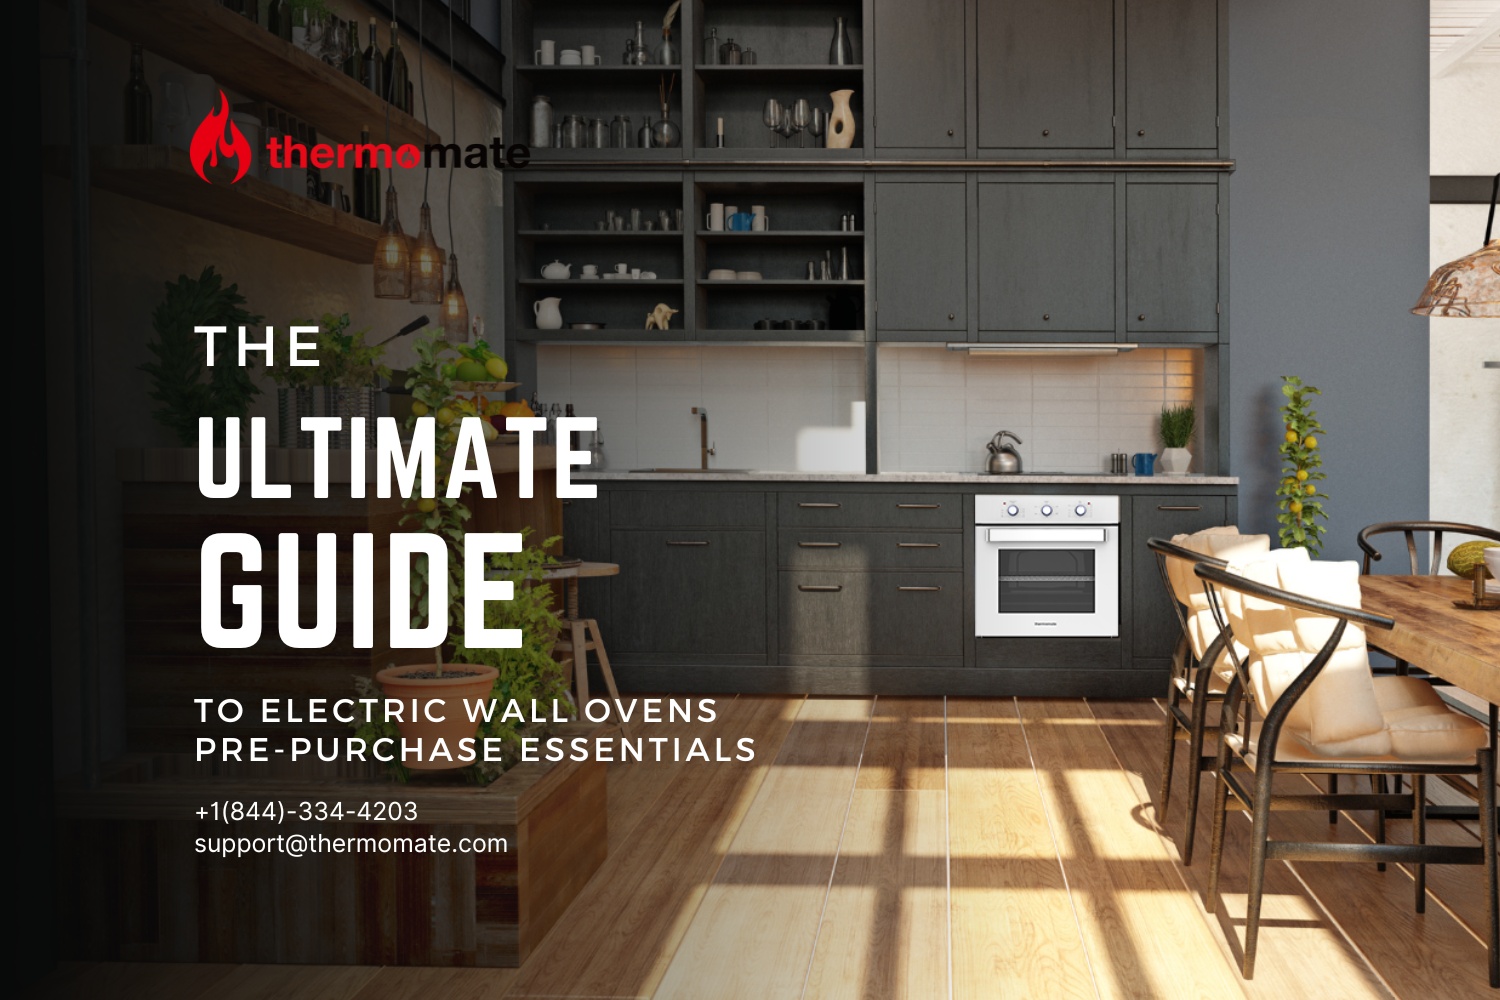 The Ultimate Guide to Electric Wall Ovens: Pre-Purchase Essentials